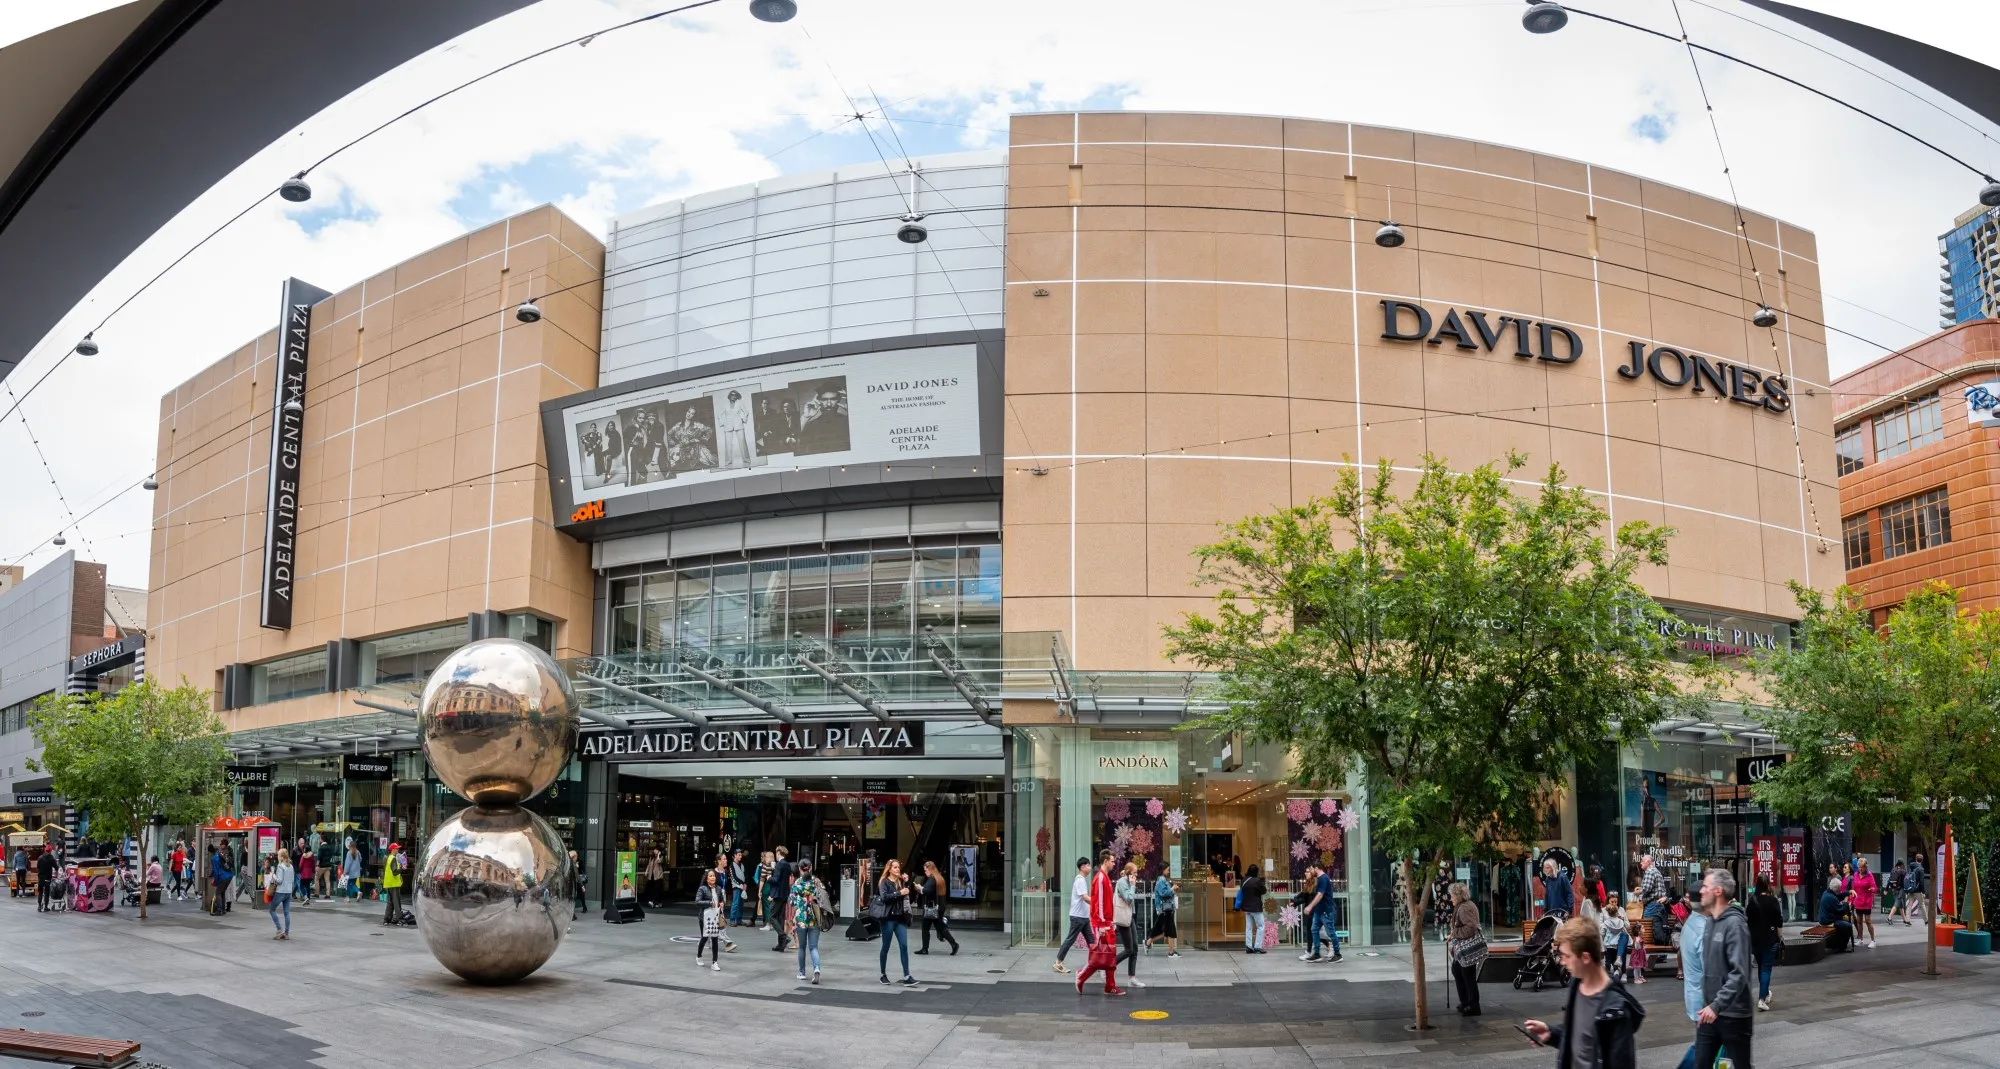 Adelaide Central Plaza in Australia, australia_and_oceania | Fragrance,Shoes,Accessories,Clothes,Sportswear,Travel Bags - Country Helper